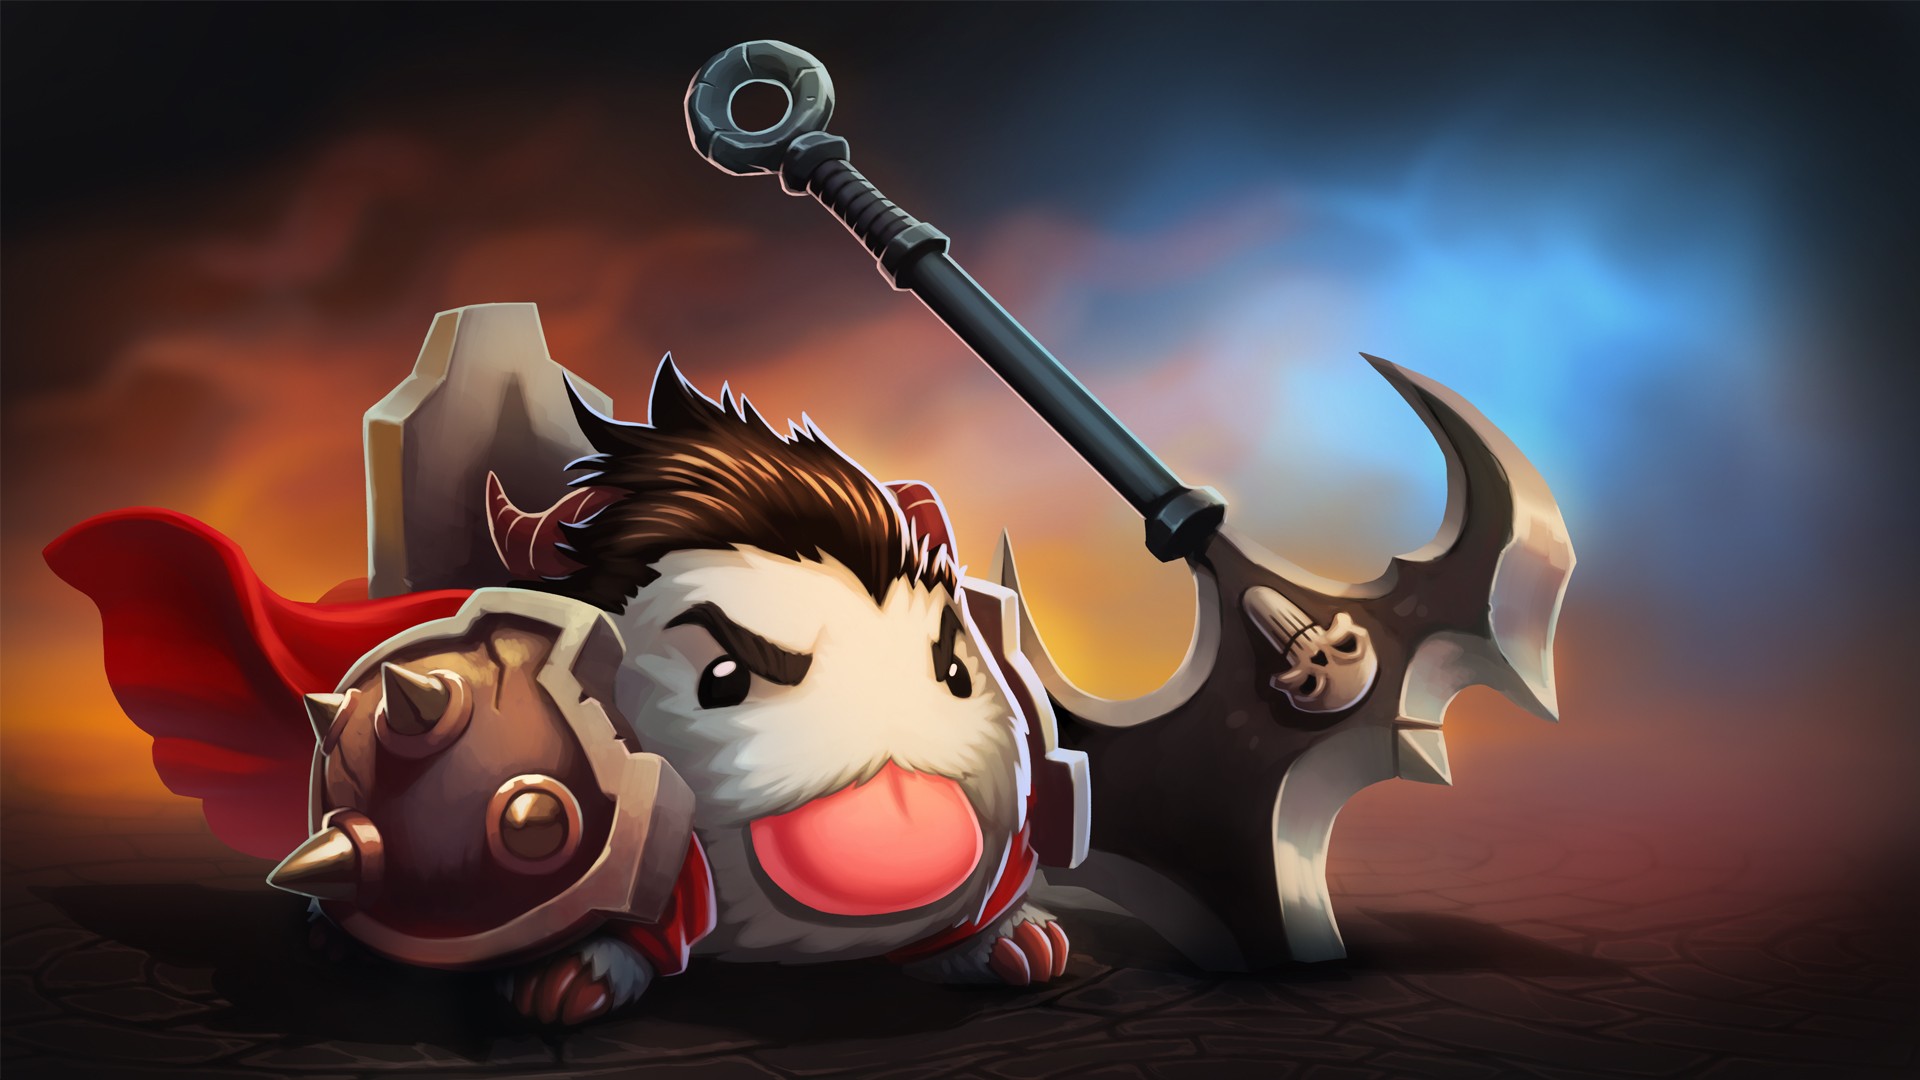 General 1920x1080 League of Legends Darius (League of Legends) Poro (League of Legends) video game art PC gaming video game characters